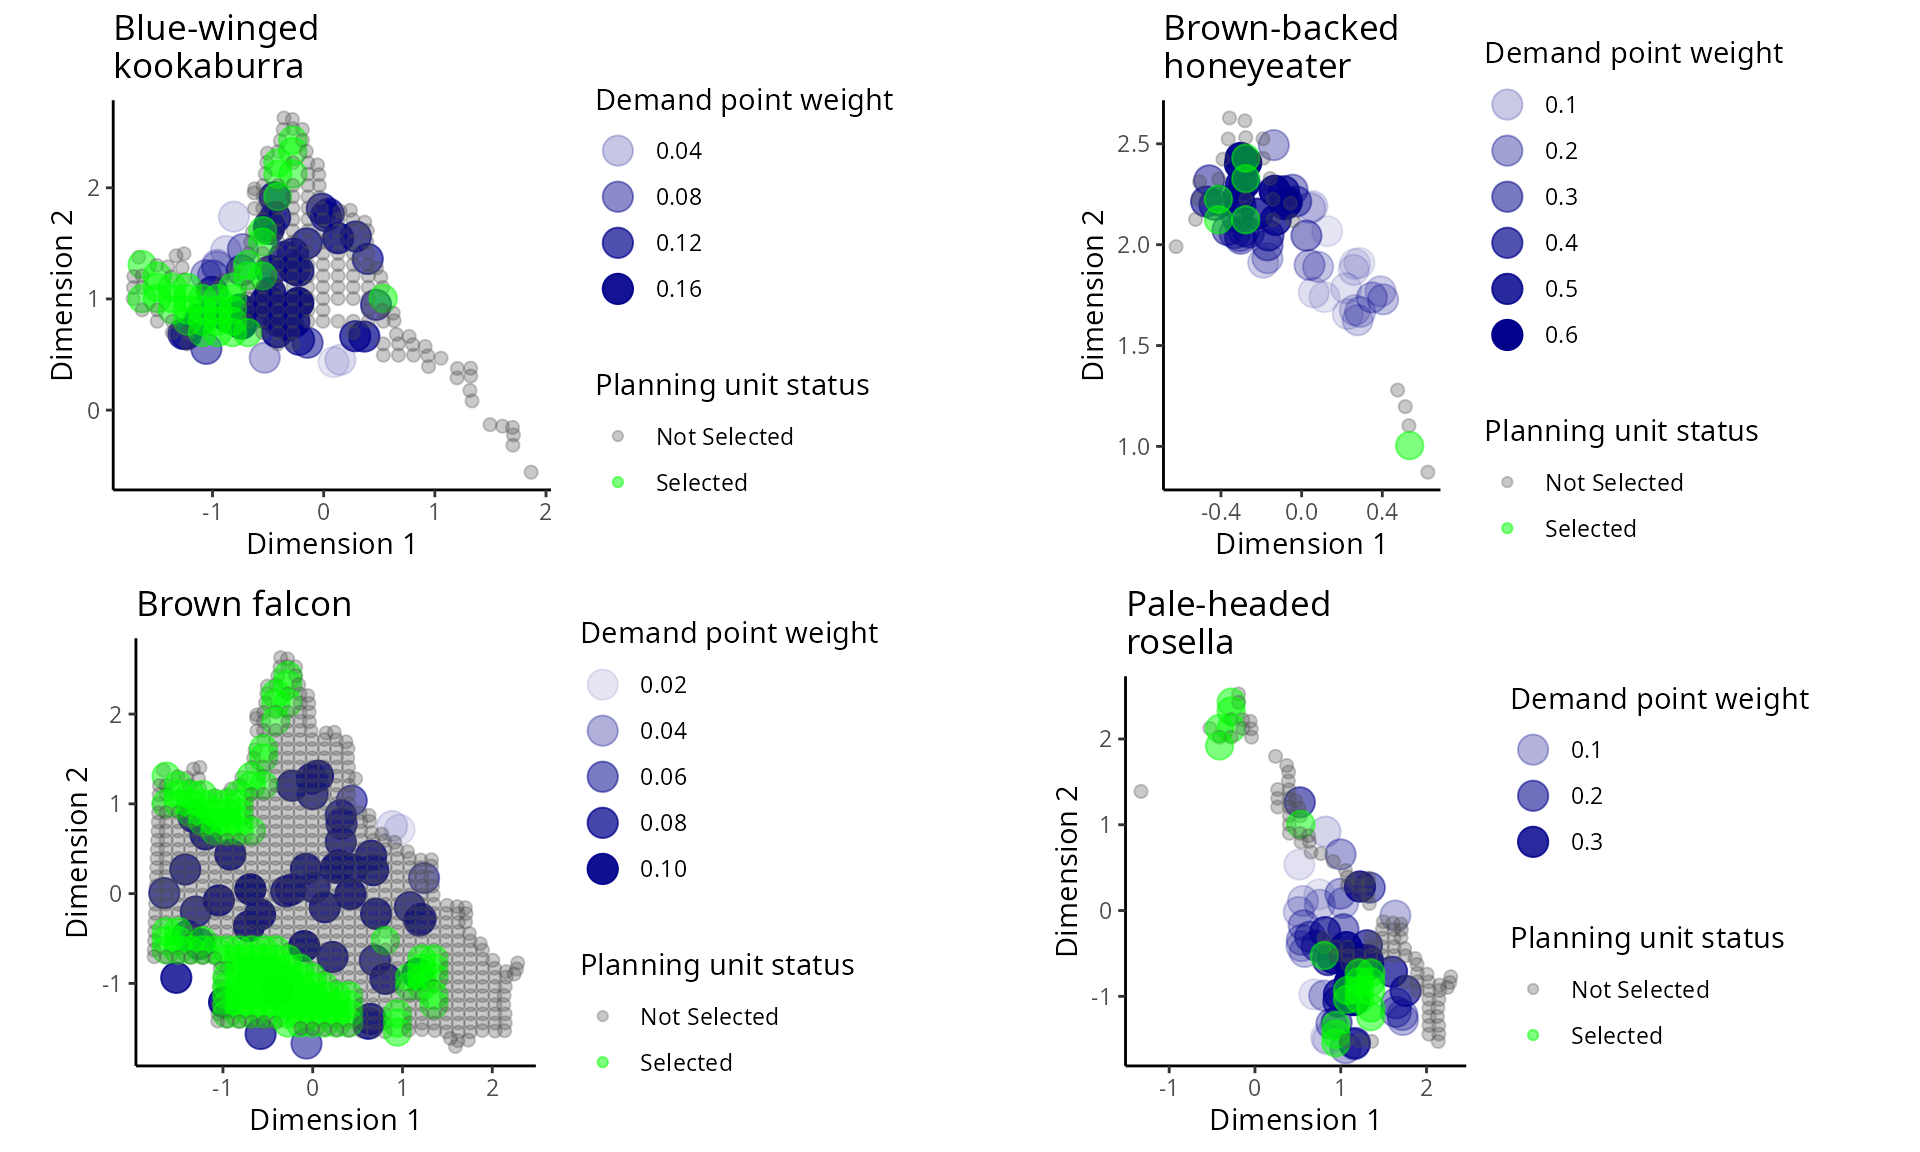 _Distribution of amount-based prioritization in the geographic attribute space. Points denote combinations of environmental conditions. Green and grey points represent planning unit selected for and not selected for prioritization (respectively). Blue points denote demand points, and their size indicates their weighting._